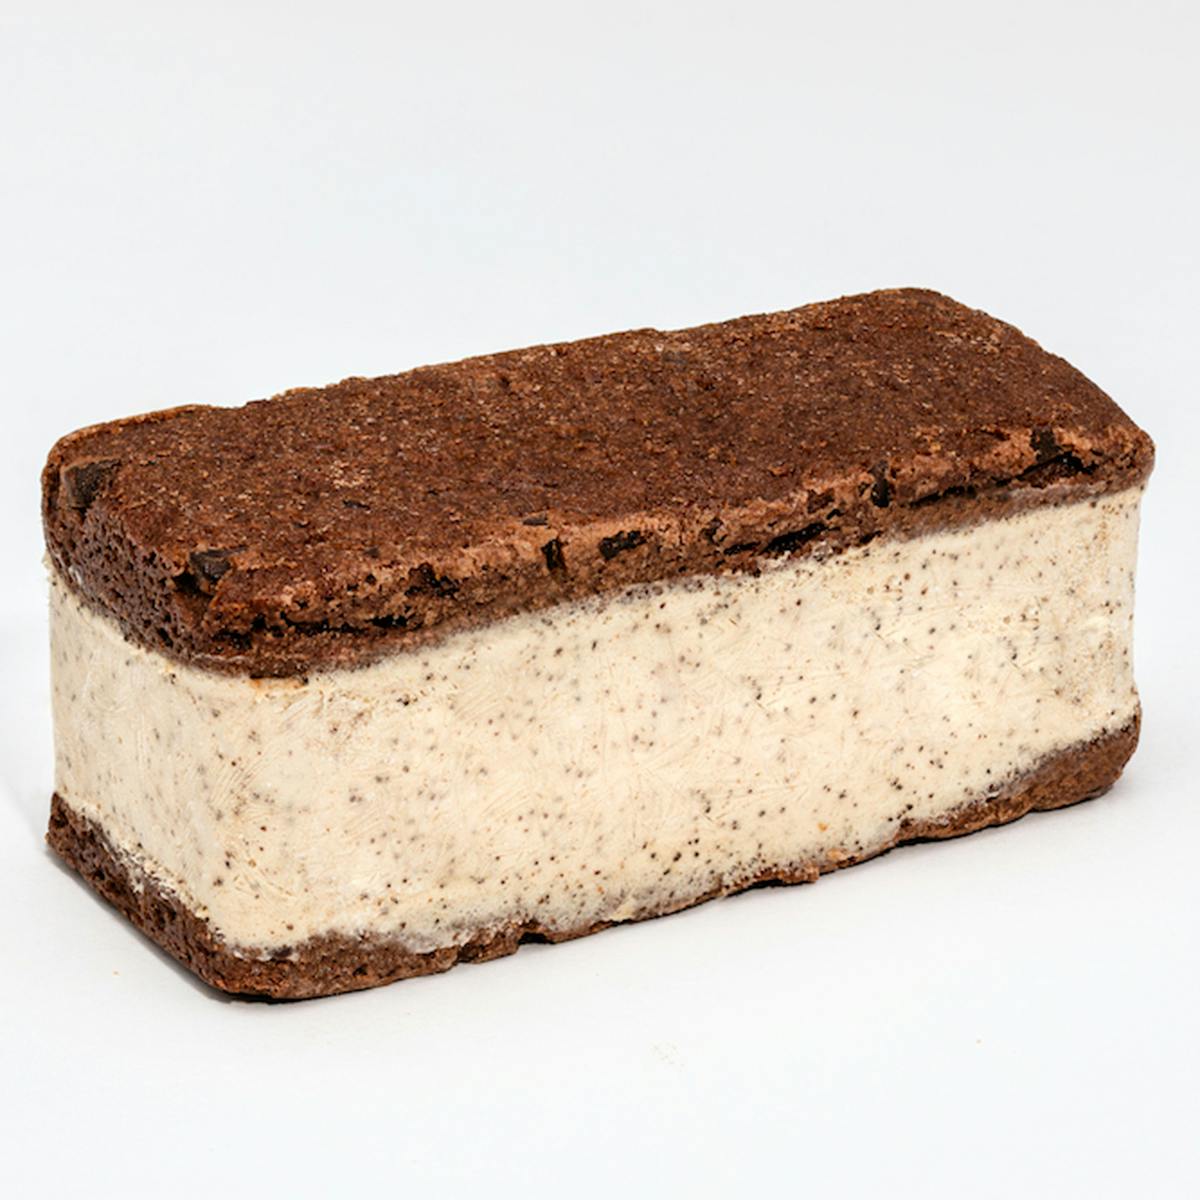 Ice Cream Sandwiches Choose Your Own 8 Pack By Nightingale Ice Cream Sandwiches Goldbelly